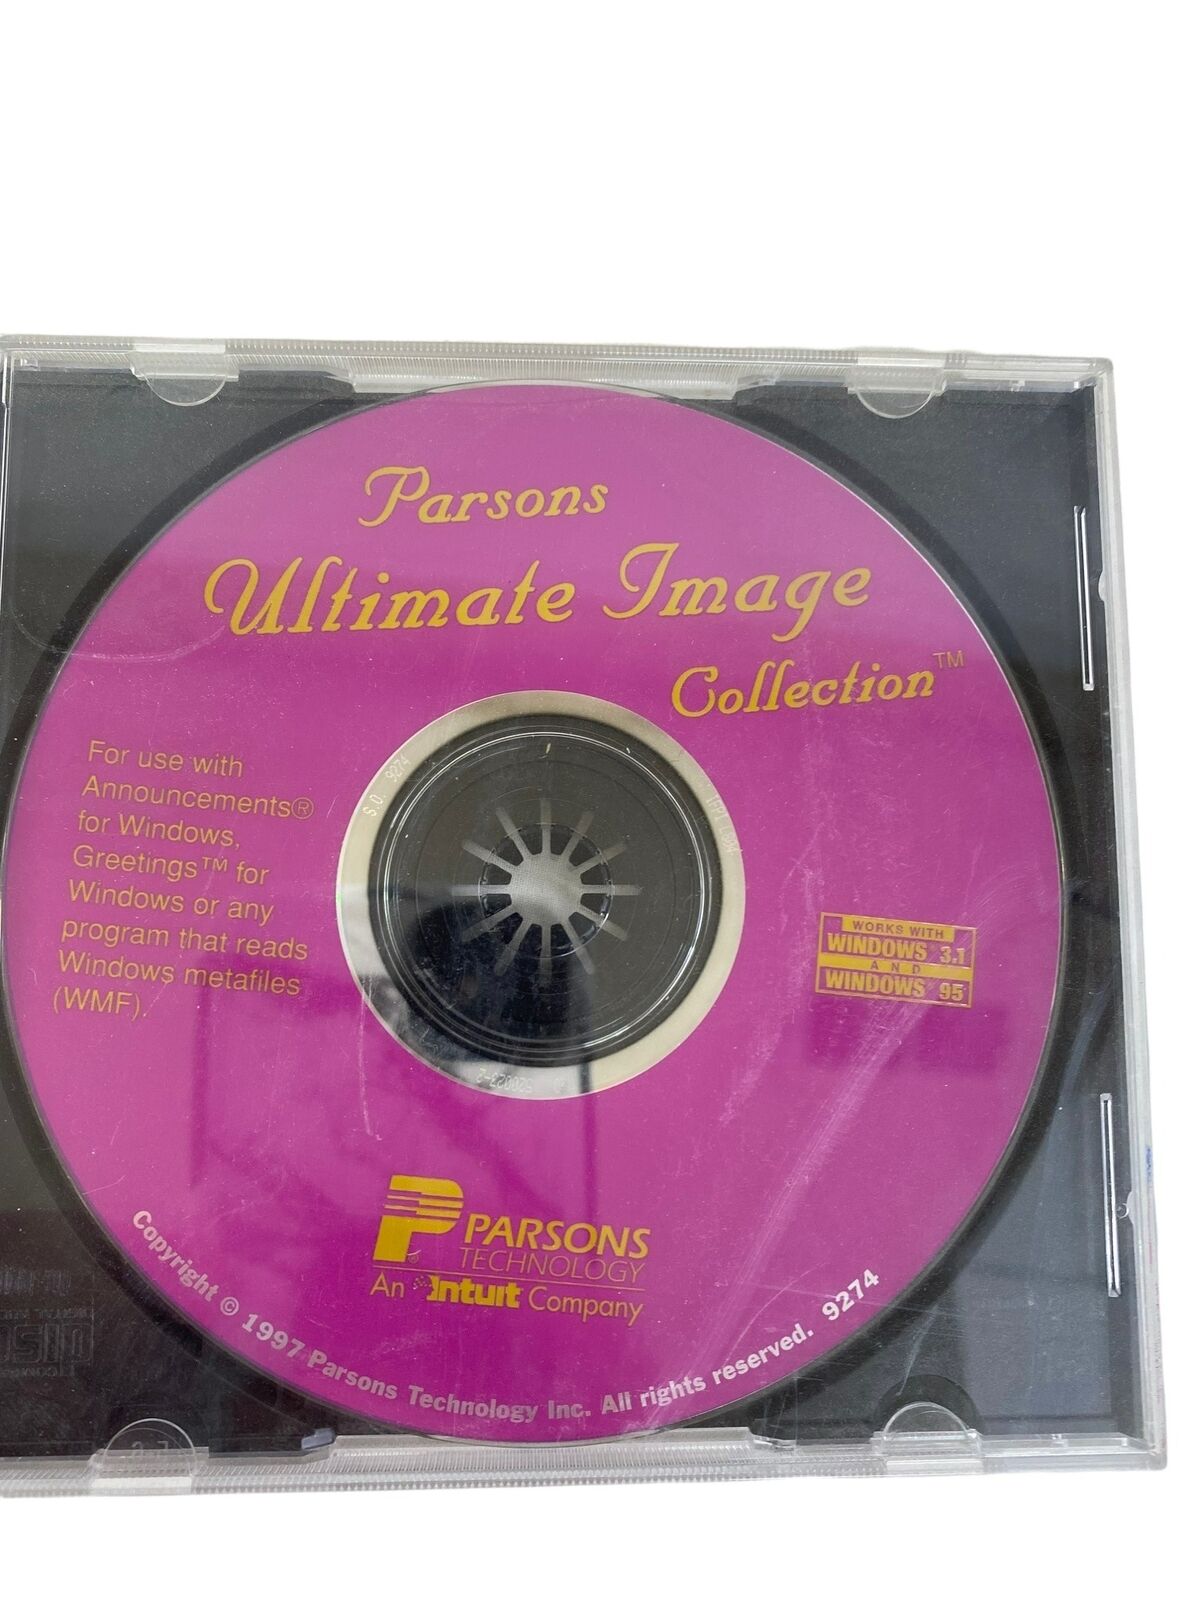 Vintage Parsons Ultimate Image Collection cd rom windows 3.1 95